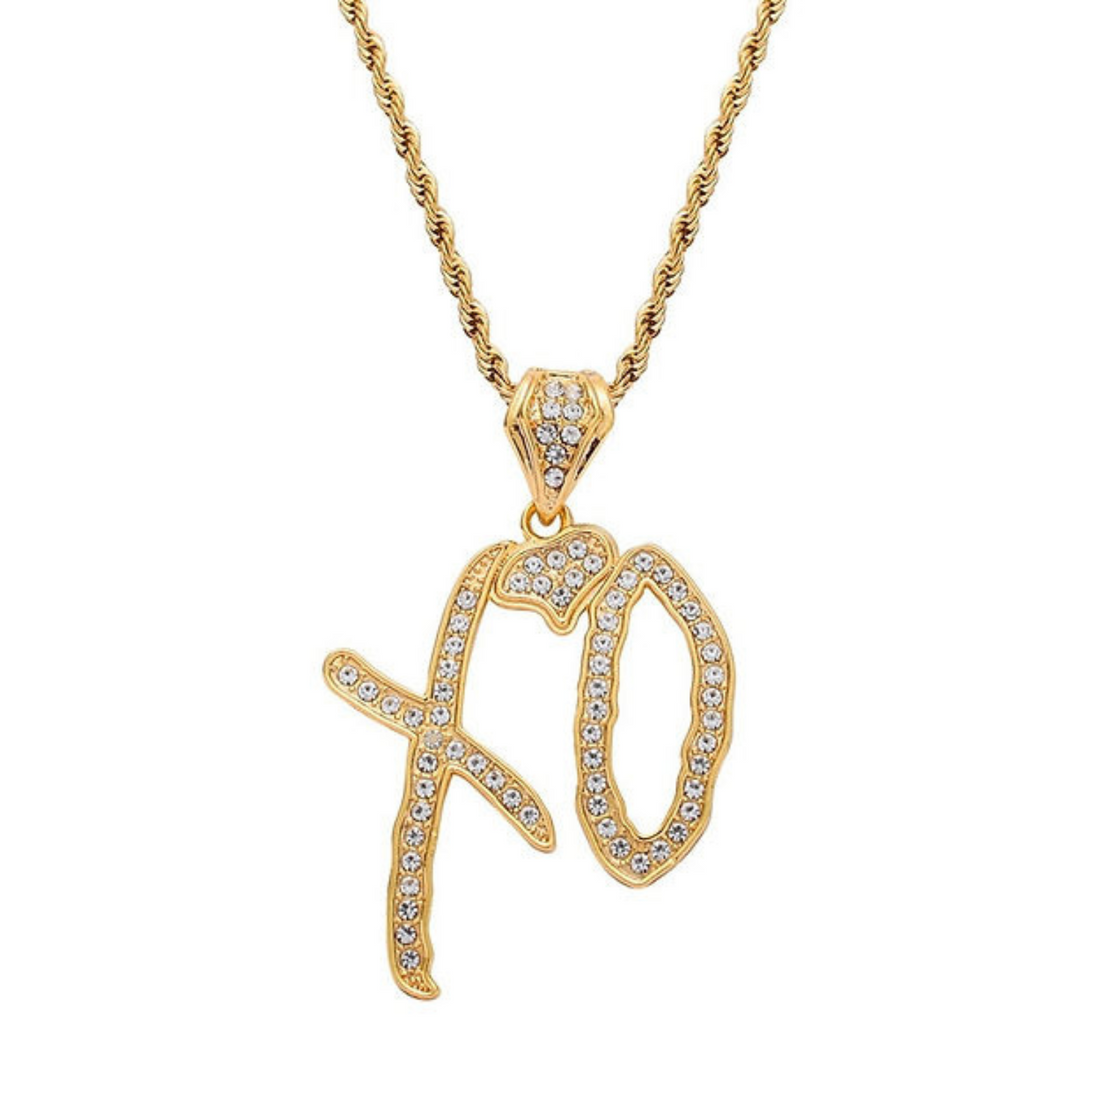 XO Chain – The Drip Couture